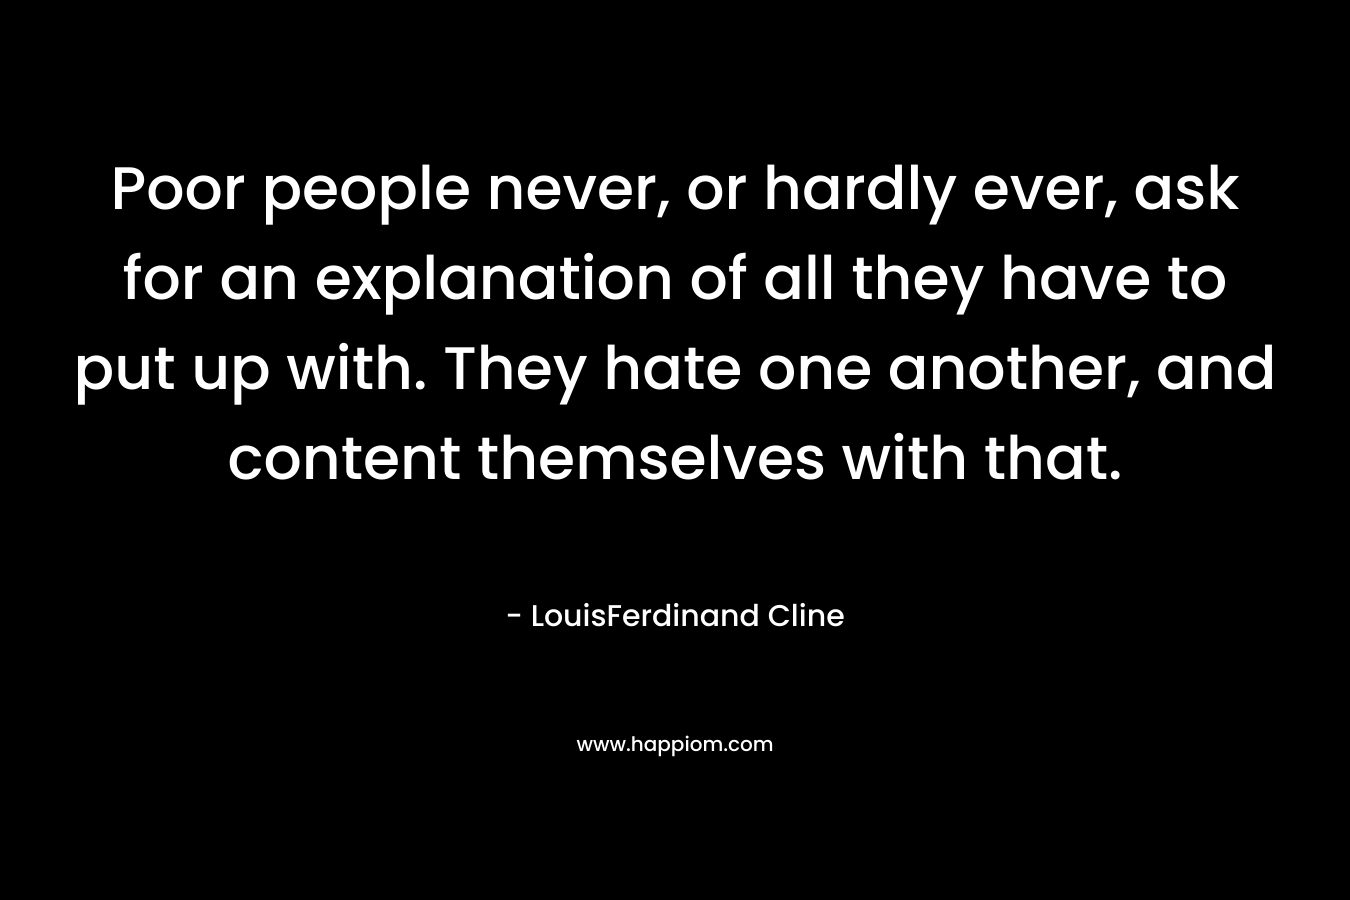 Poor people never, or hardly ever, ask for an explanation of all they have to put up with. They hate one another, and content themselves with that. – LouisFerdinand Cline